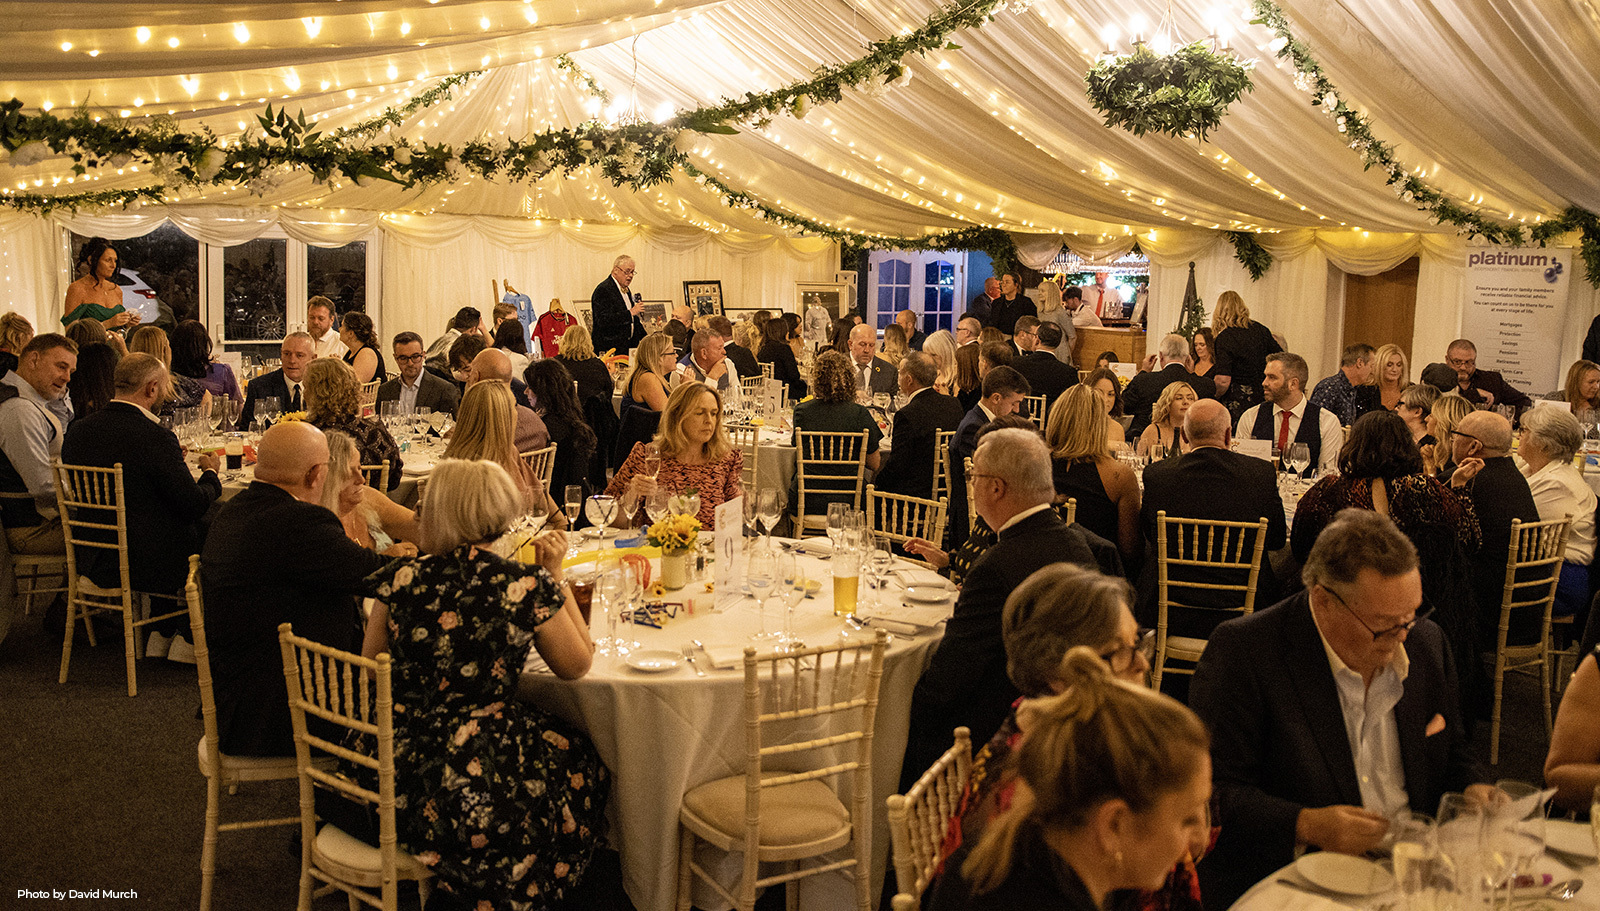 Attendees of the recent East Cheshire Hospice fundraising evening, enjoying their meal in the Marquee at Hilltop Country House